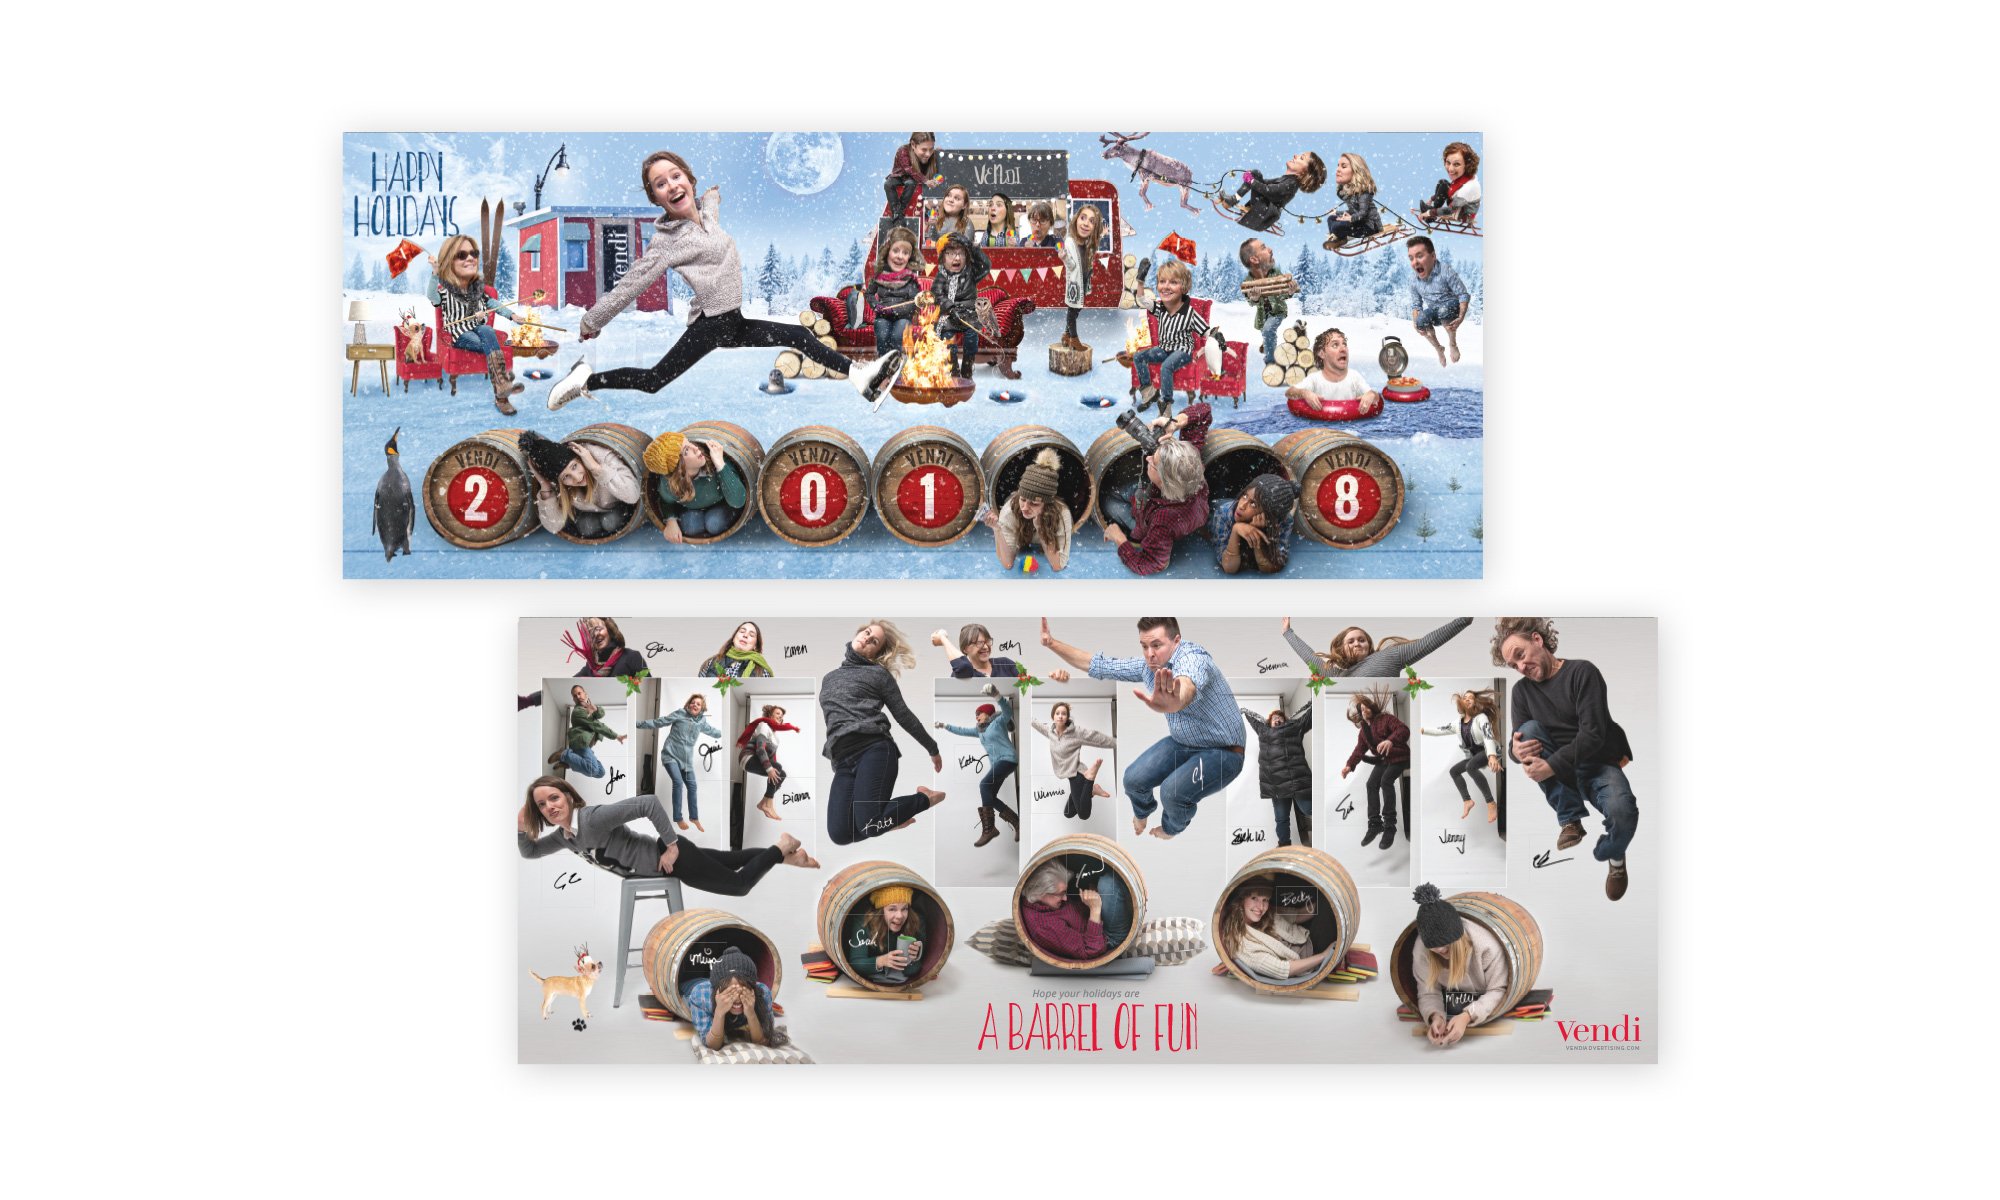 Full front and full back of the 2018 Vendi holiday card, with a winter pond fun/activities theme